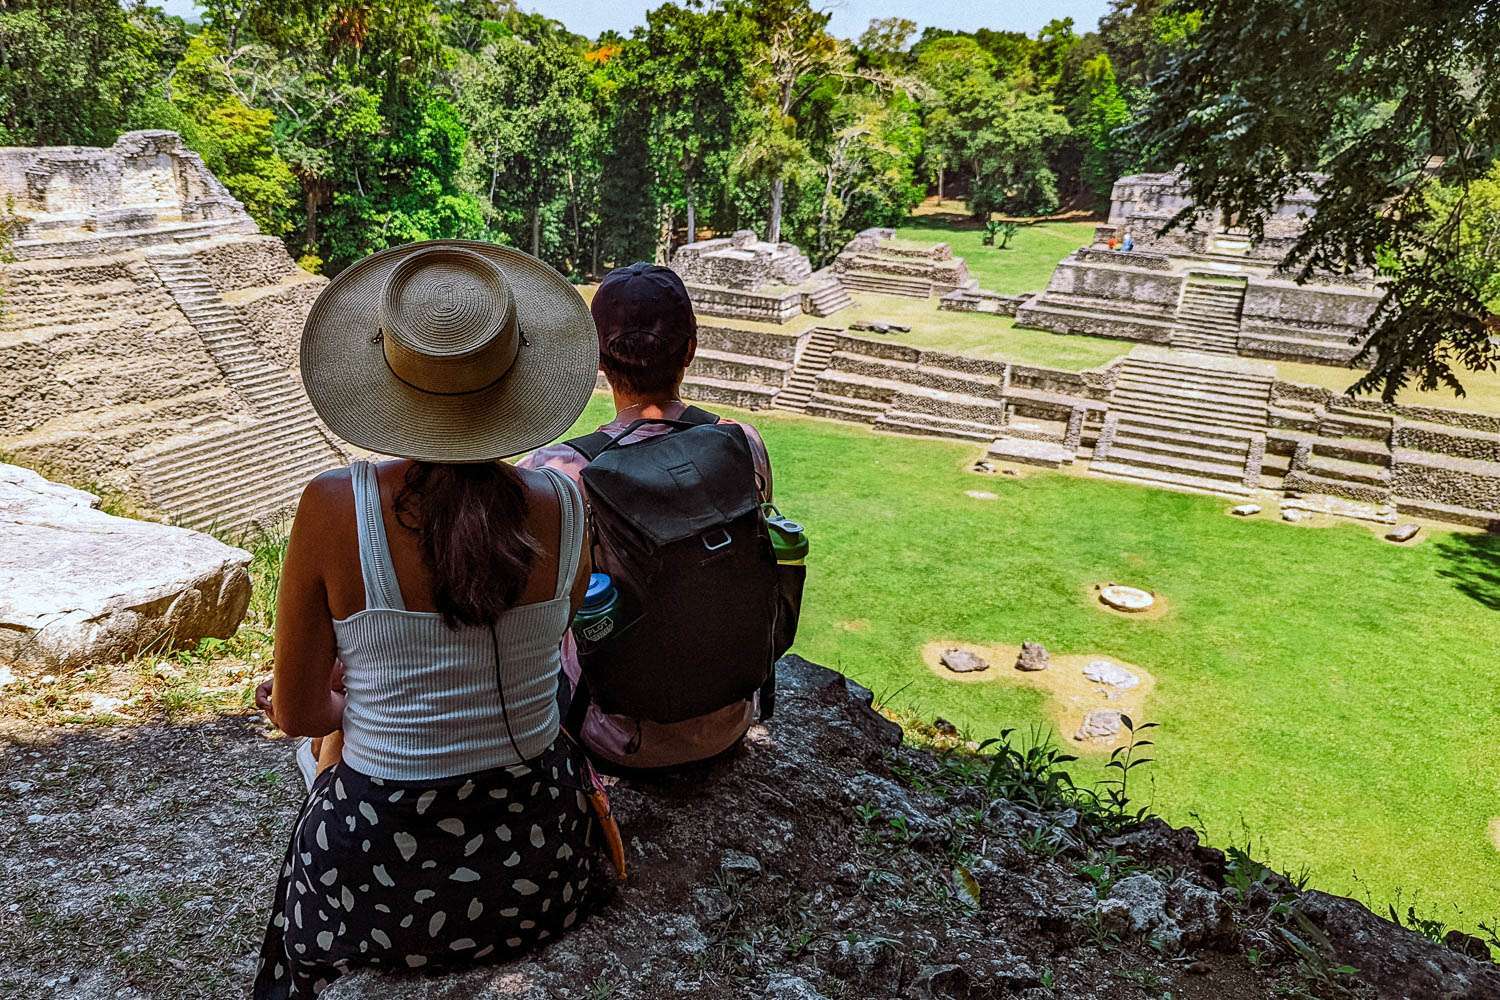 Rachel Off Duty: A Man and Woman Admiring the Pyramids in Caracol, Belize